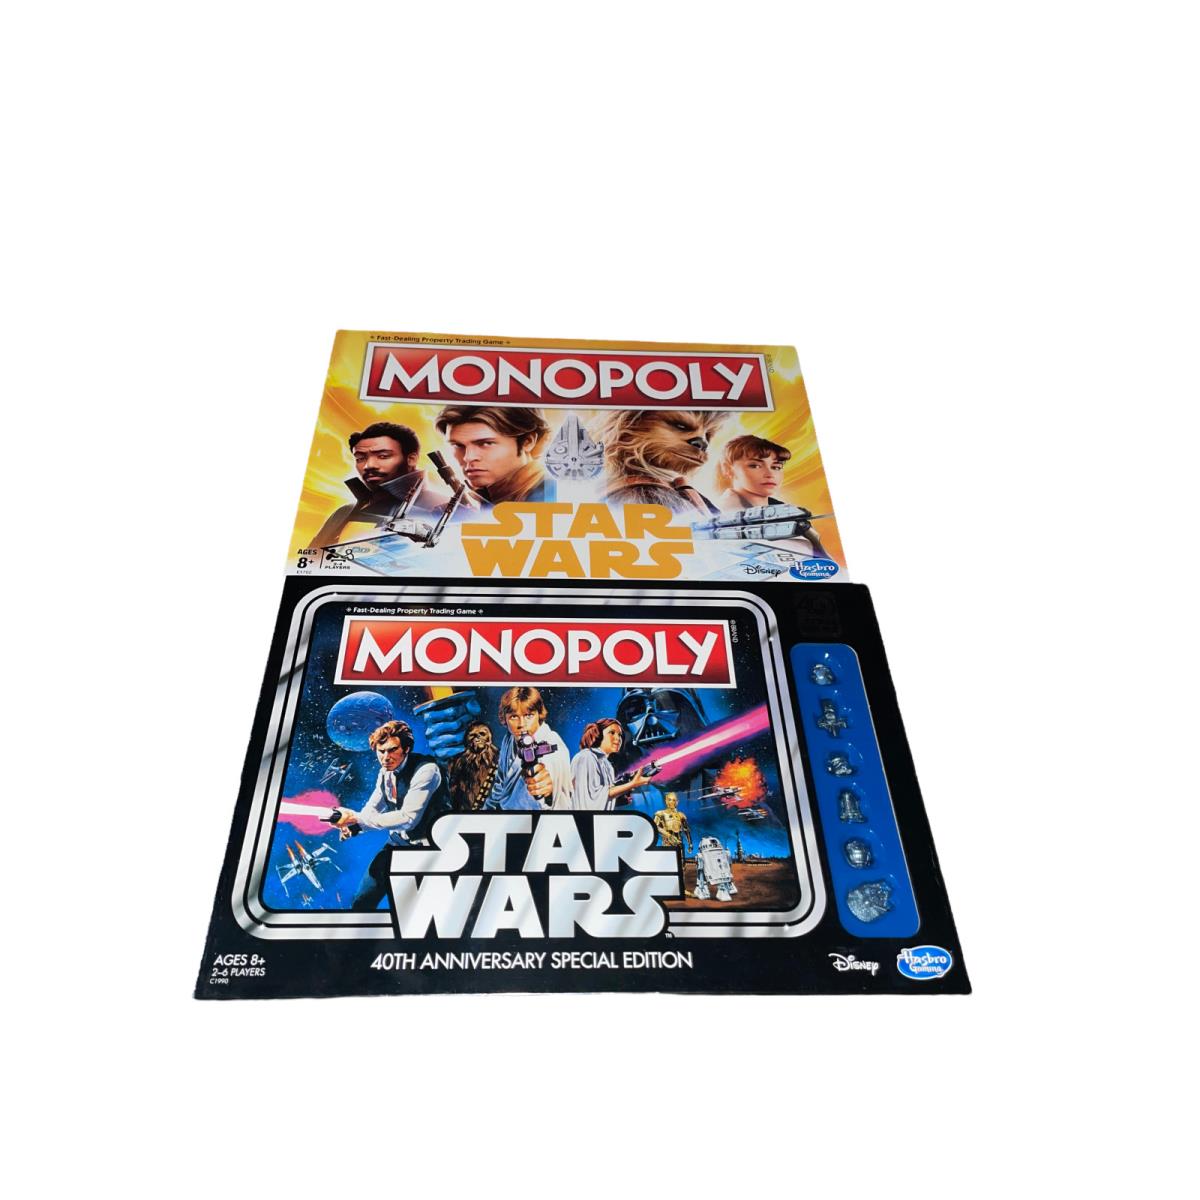 Star Wars Monopoly 40th Anniversary Special Edition